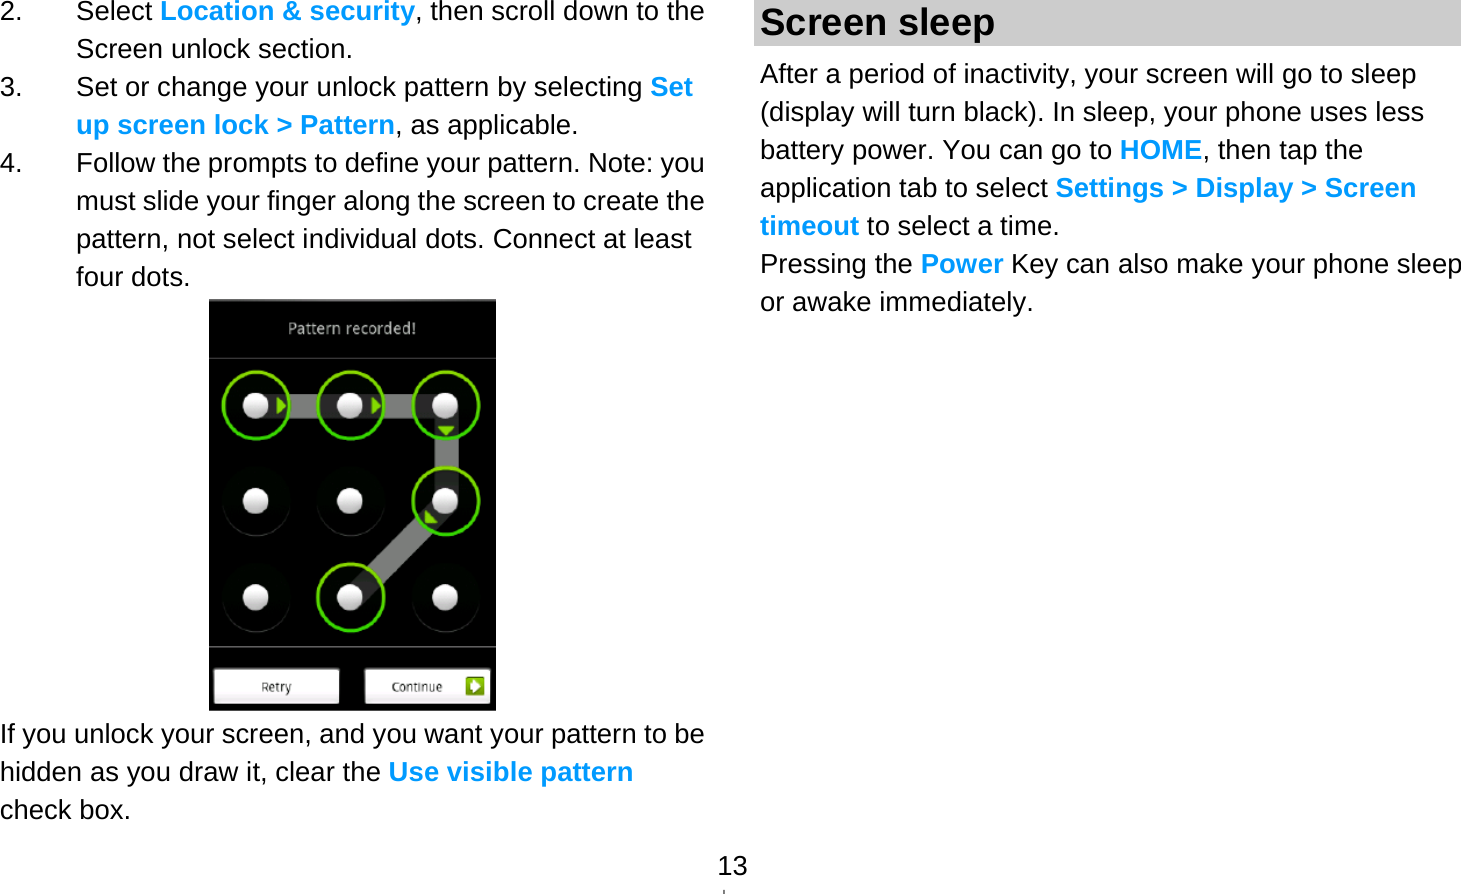   132. Select Location &amp; security, then scroll down to the Screen unlock section. 3.  Set or change your unlock pattern by selecting Set up screen lock &gt; Pattern, as applicable. 4.  Follow the prompts to define your pattern. Note: you must slide your finger along the screen to create the pattern, not select individual dots. Connect at least four dots.  If you unlock your screen, and you want your pattern to be hidden as you draw it, clear the Use visible pattern check box. Screen sleep After a period of inactivity, your screen will go to sleep (display will turn black). In sleep, your phone uses less battery power. You can go to HOME, then tap the application tab to select Settings &gt; Display &gt; Screen timeout to select a time. Pressing the Power Key can also make your phone sleep or awake immediately.  